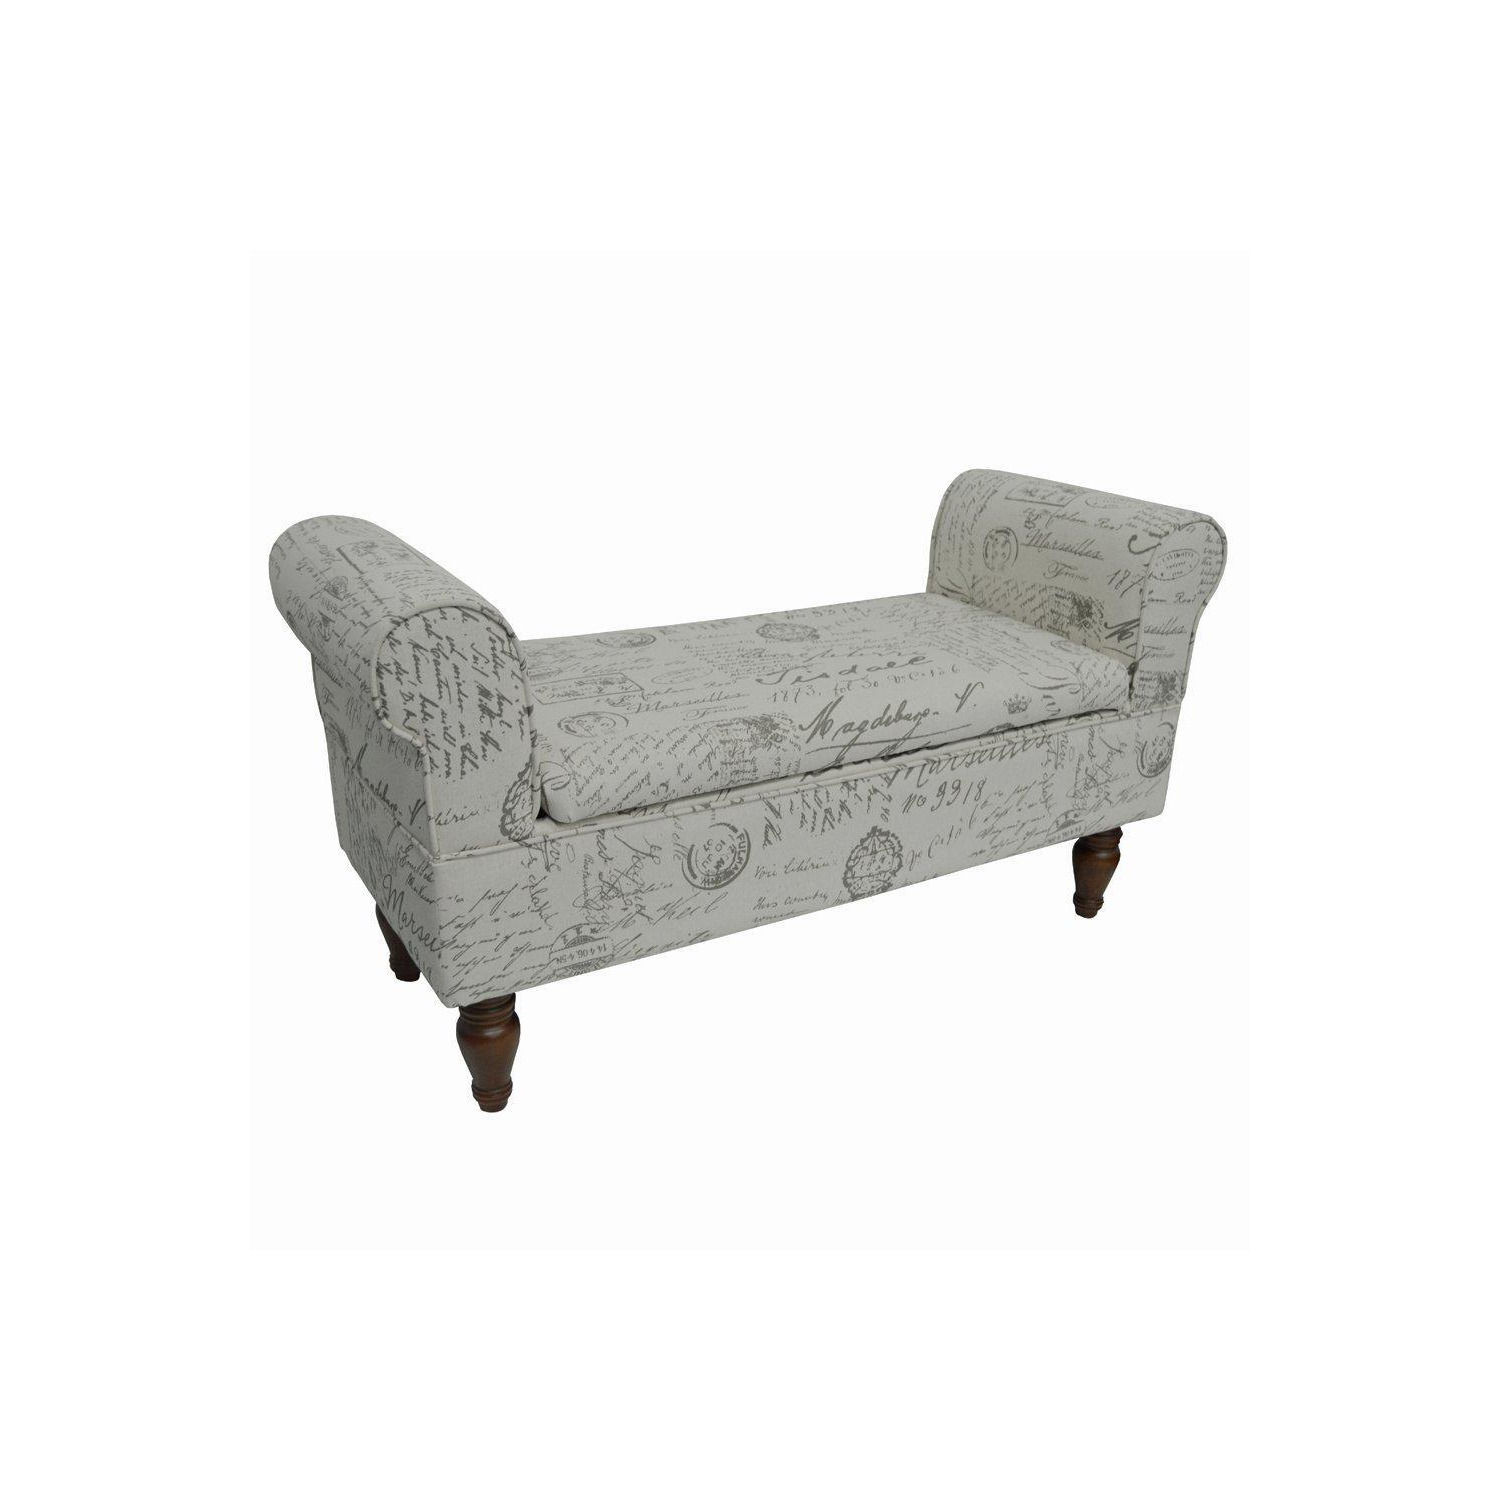 Storage Ottoman Bench  Padded Seat With Retro French Print And Wood Legs - Cream  Brown - image 1